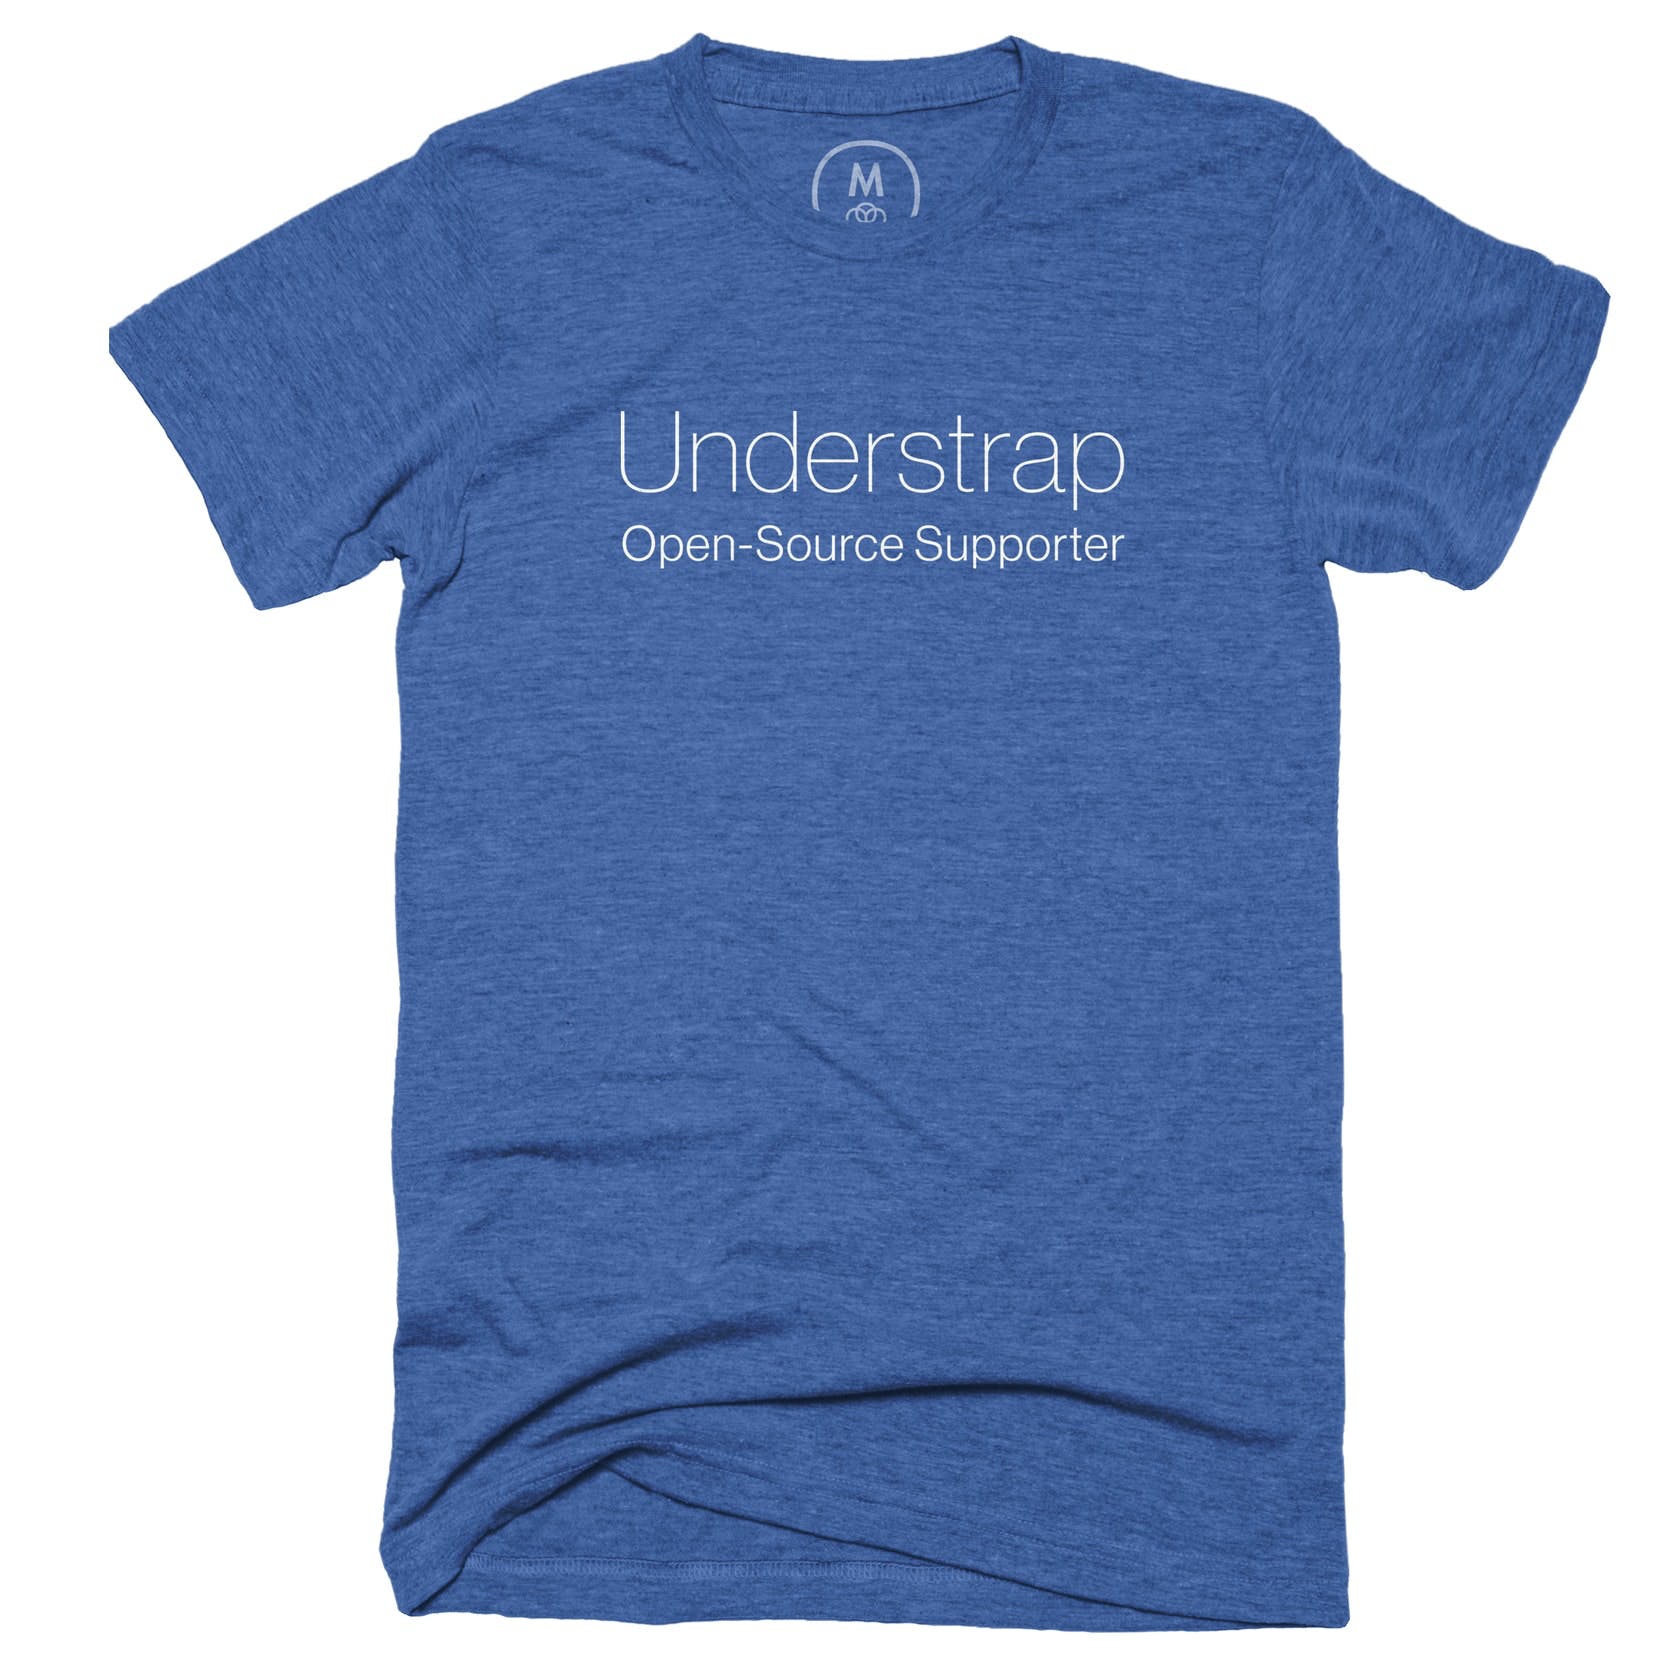 Understrap 0.9.6 + New T-Shirts and Hoodies!